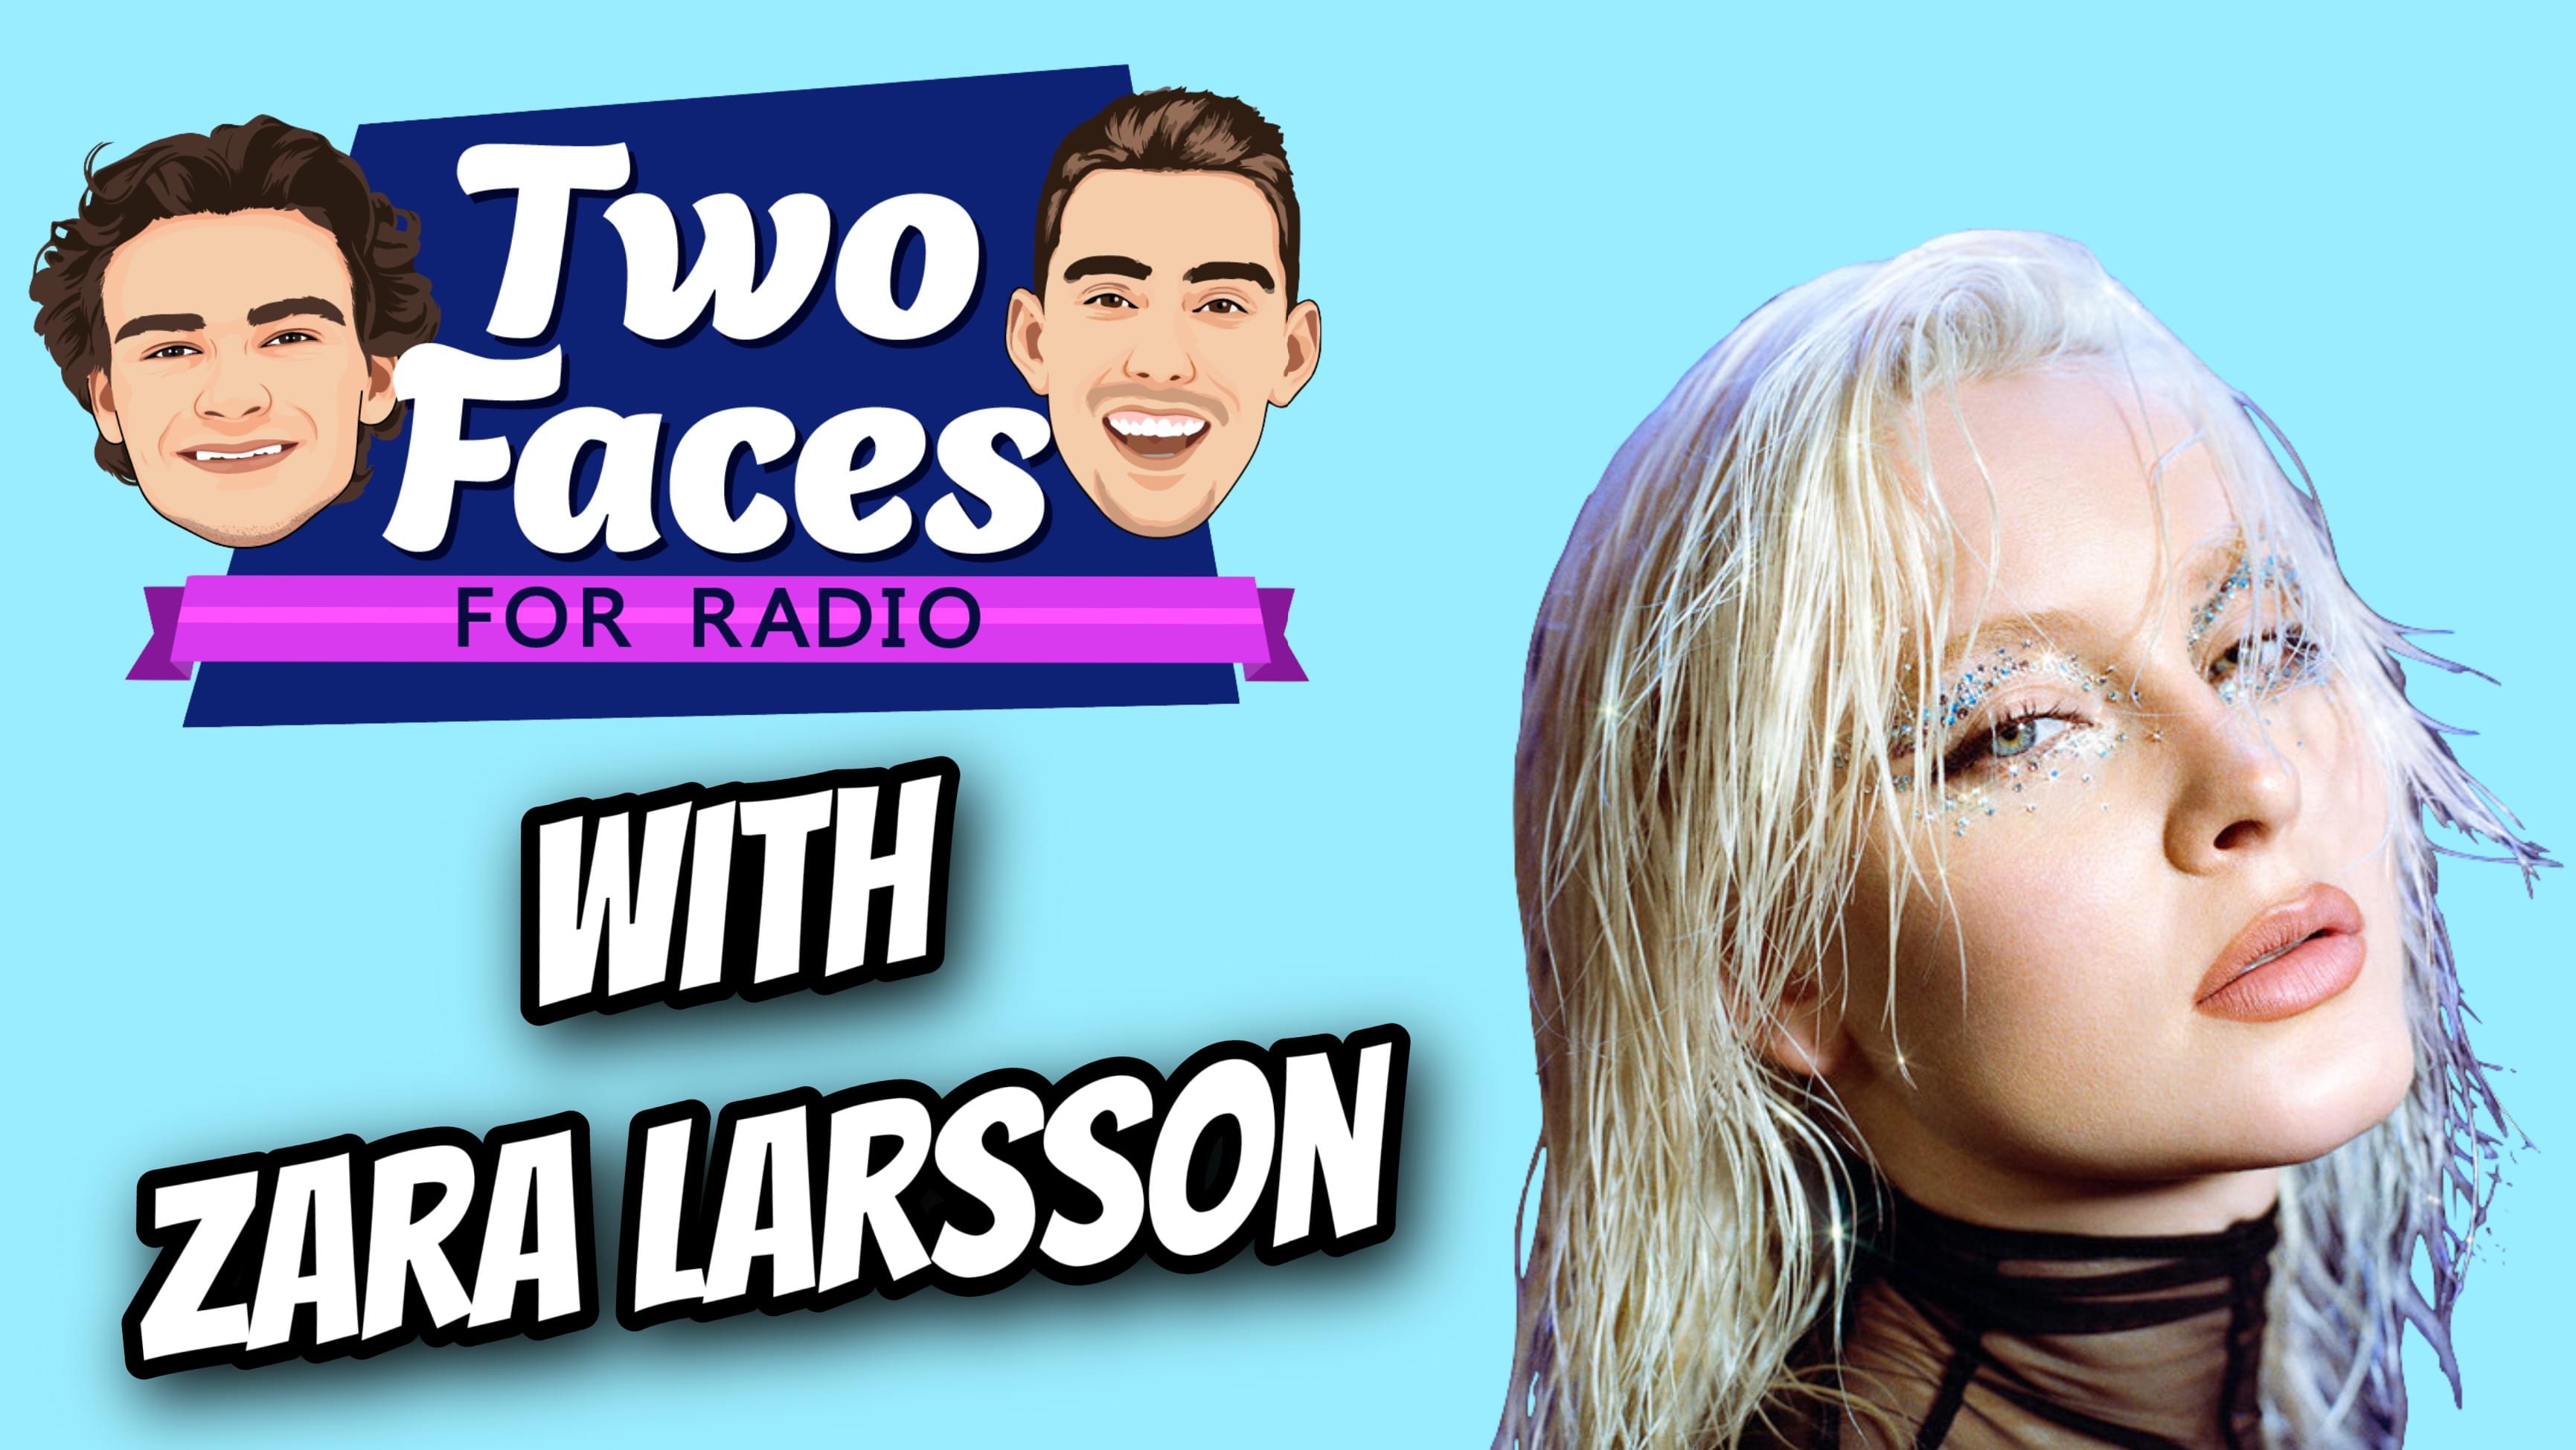 ZARA LARSSON INTERVIEW ON THE ‘TWO FACES FOR RADIO’ PODCAST [WATCH]